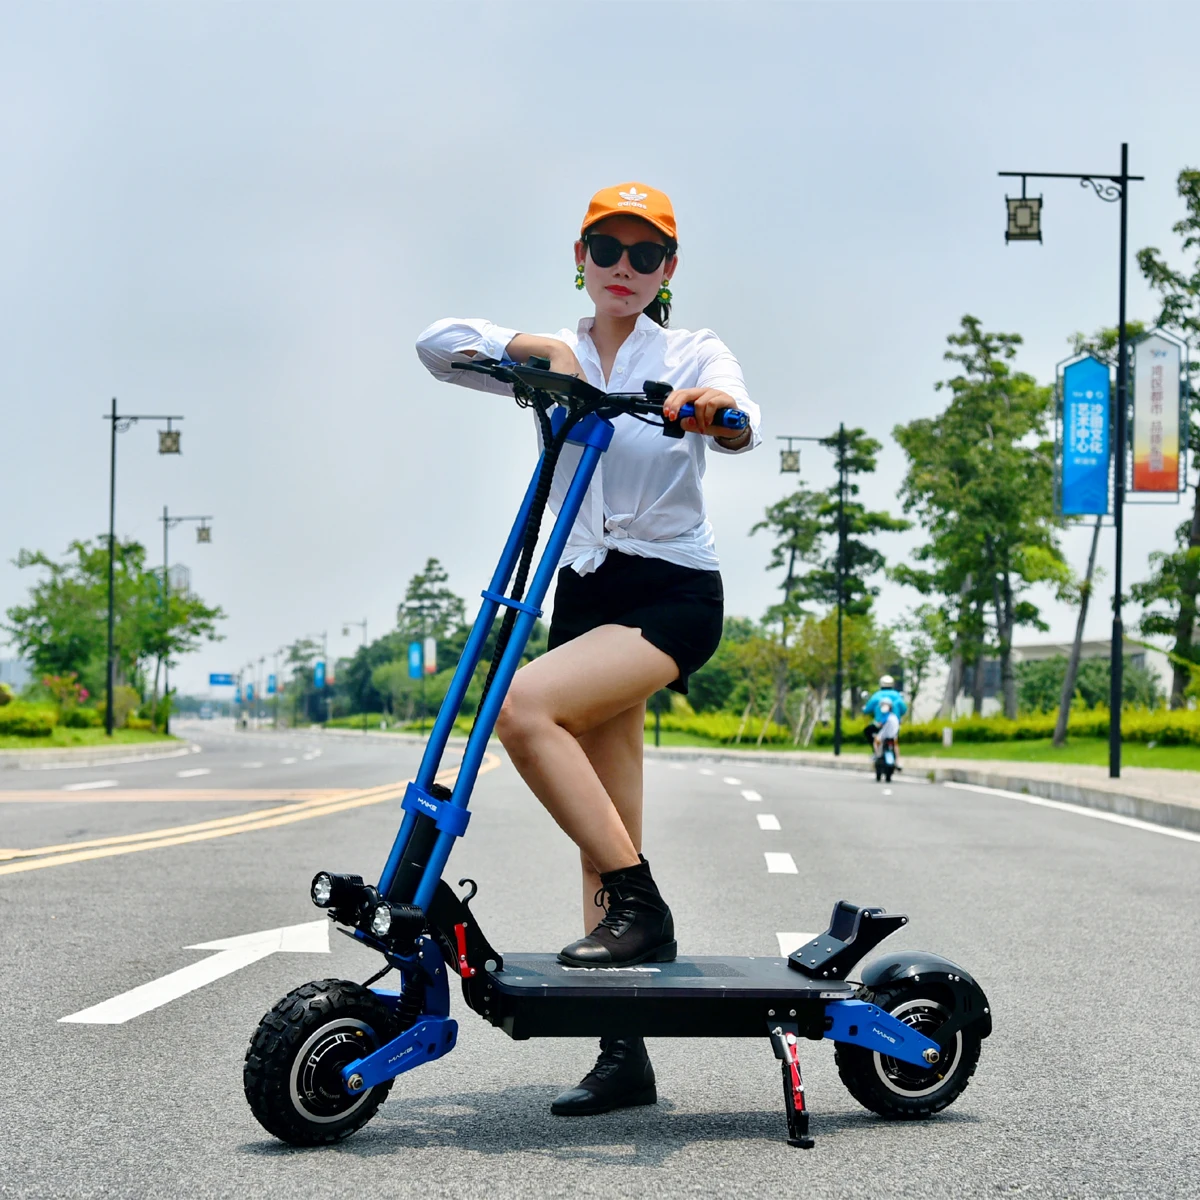 Best Selling Maike kk10s pro powerful 5600w long range 85-100kms fast scooter adult seated electric scooters